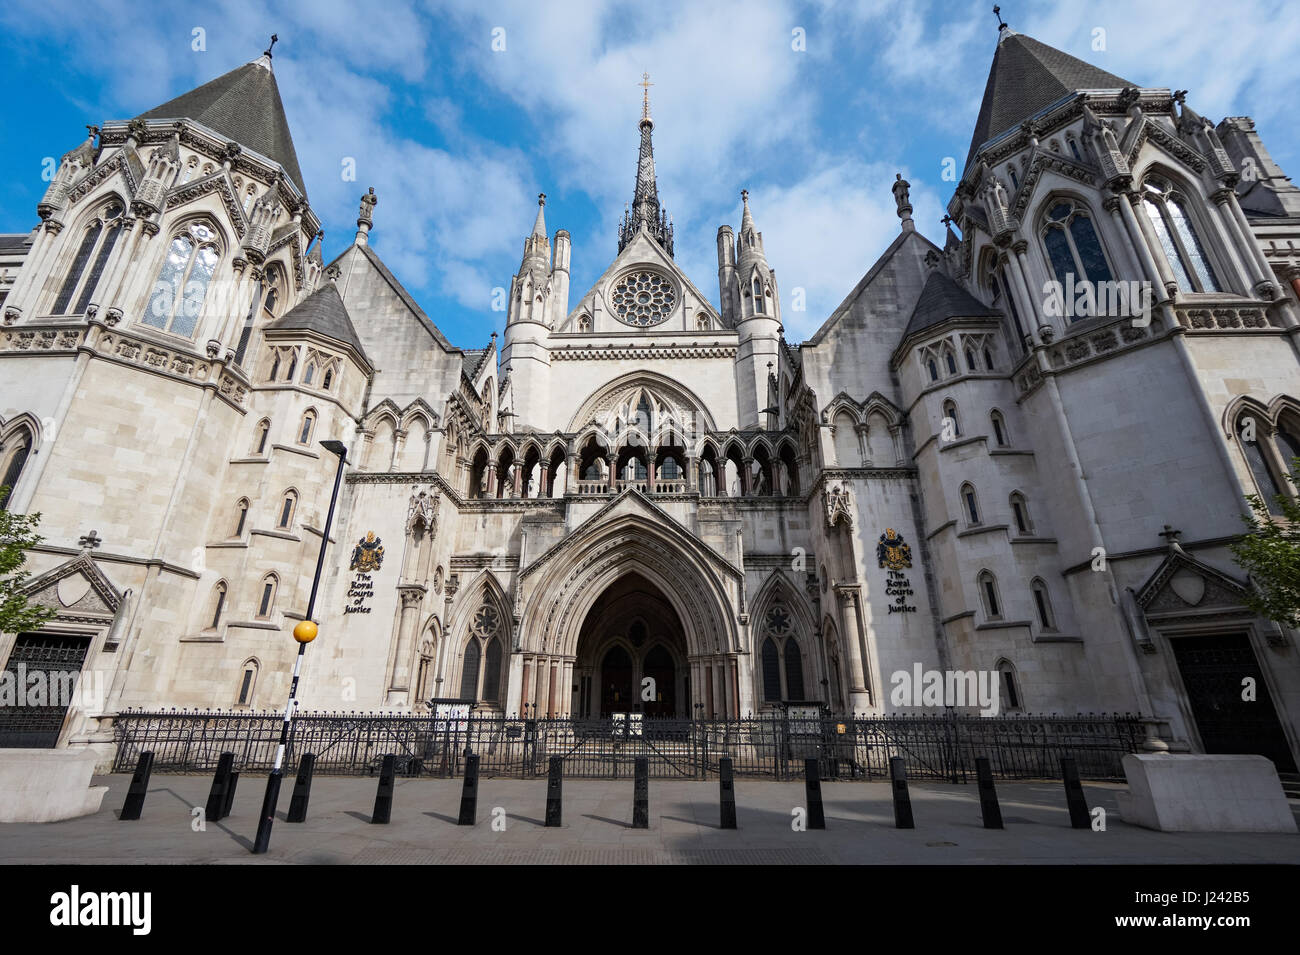 The Royal Courts of Justice on Strand, London, UK Stock Photo